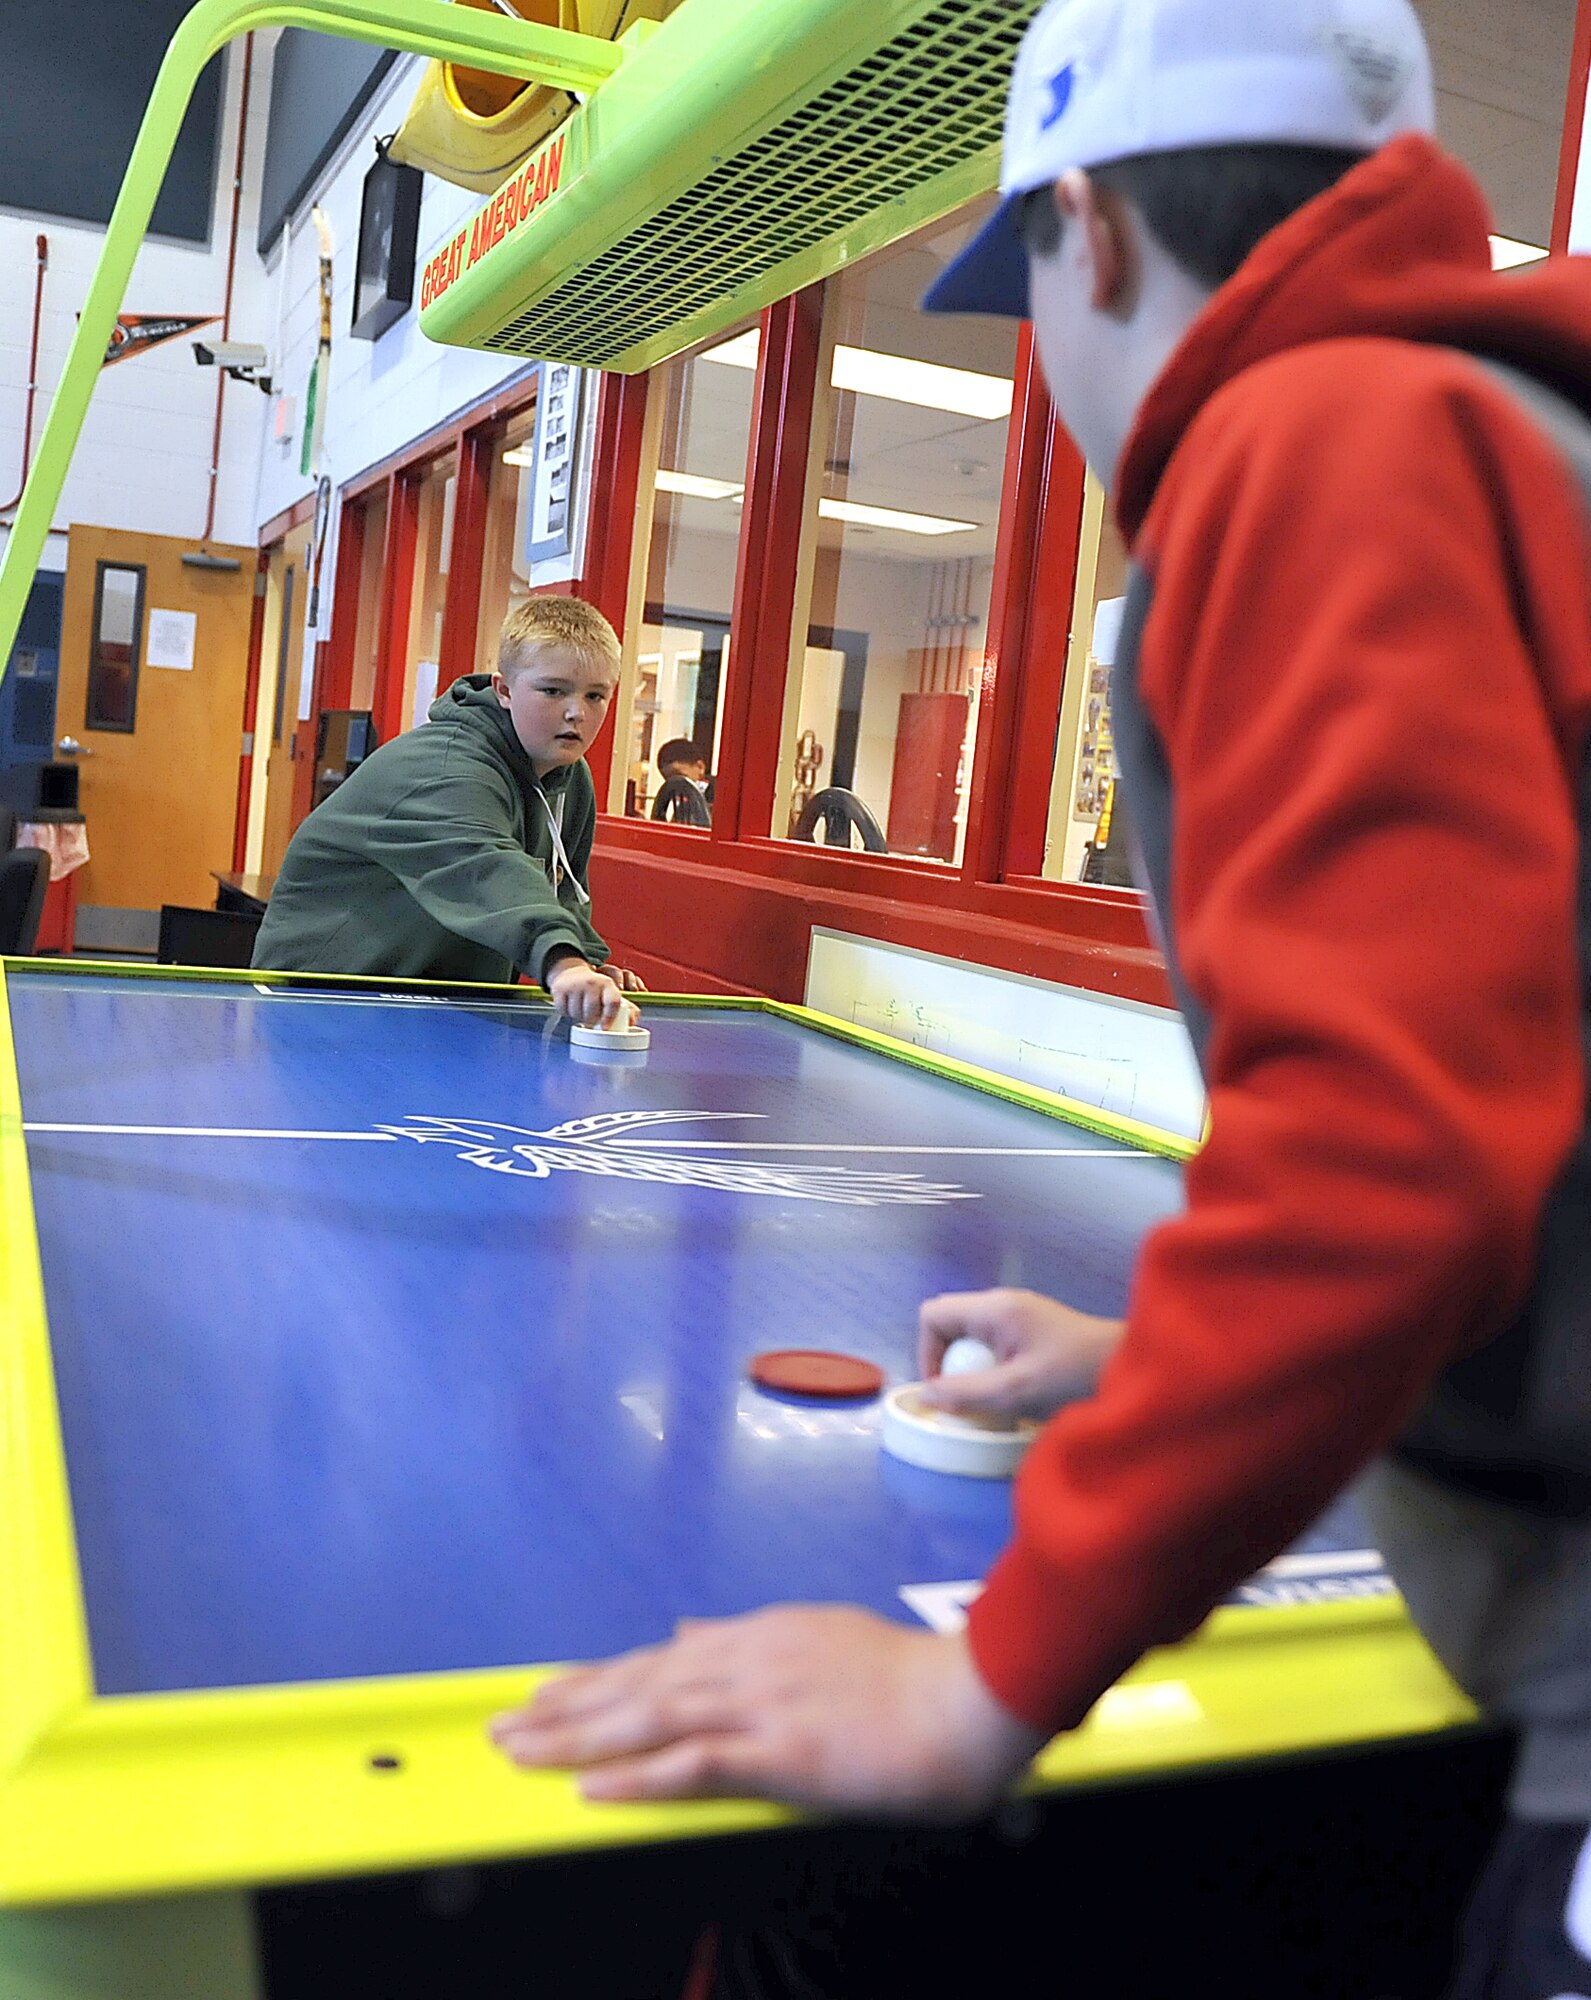 Brayden Wise, and Dominyck Sotak, both 12-year olds, enjoy a game of air hockey at the Robins Air Force Base Youth Center. (U.S. Air Force photo by Tommie Horton)
